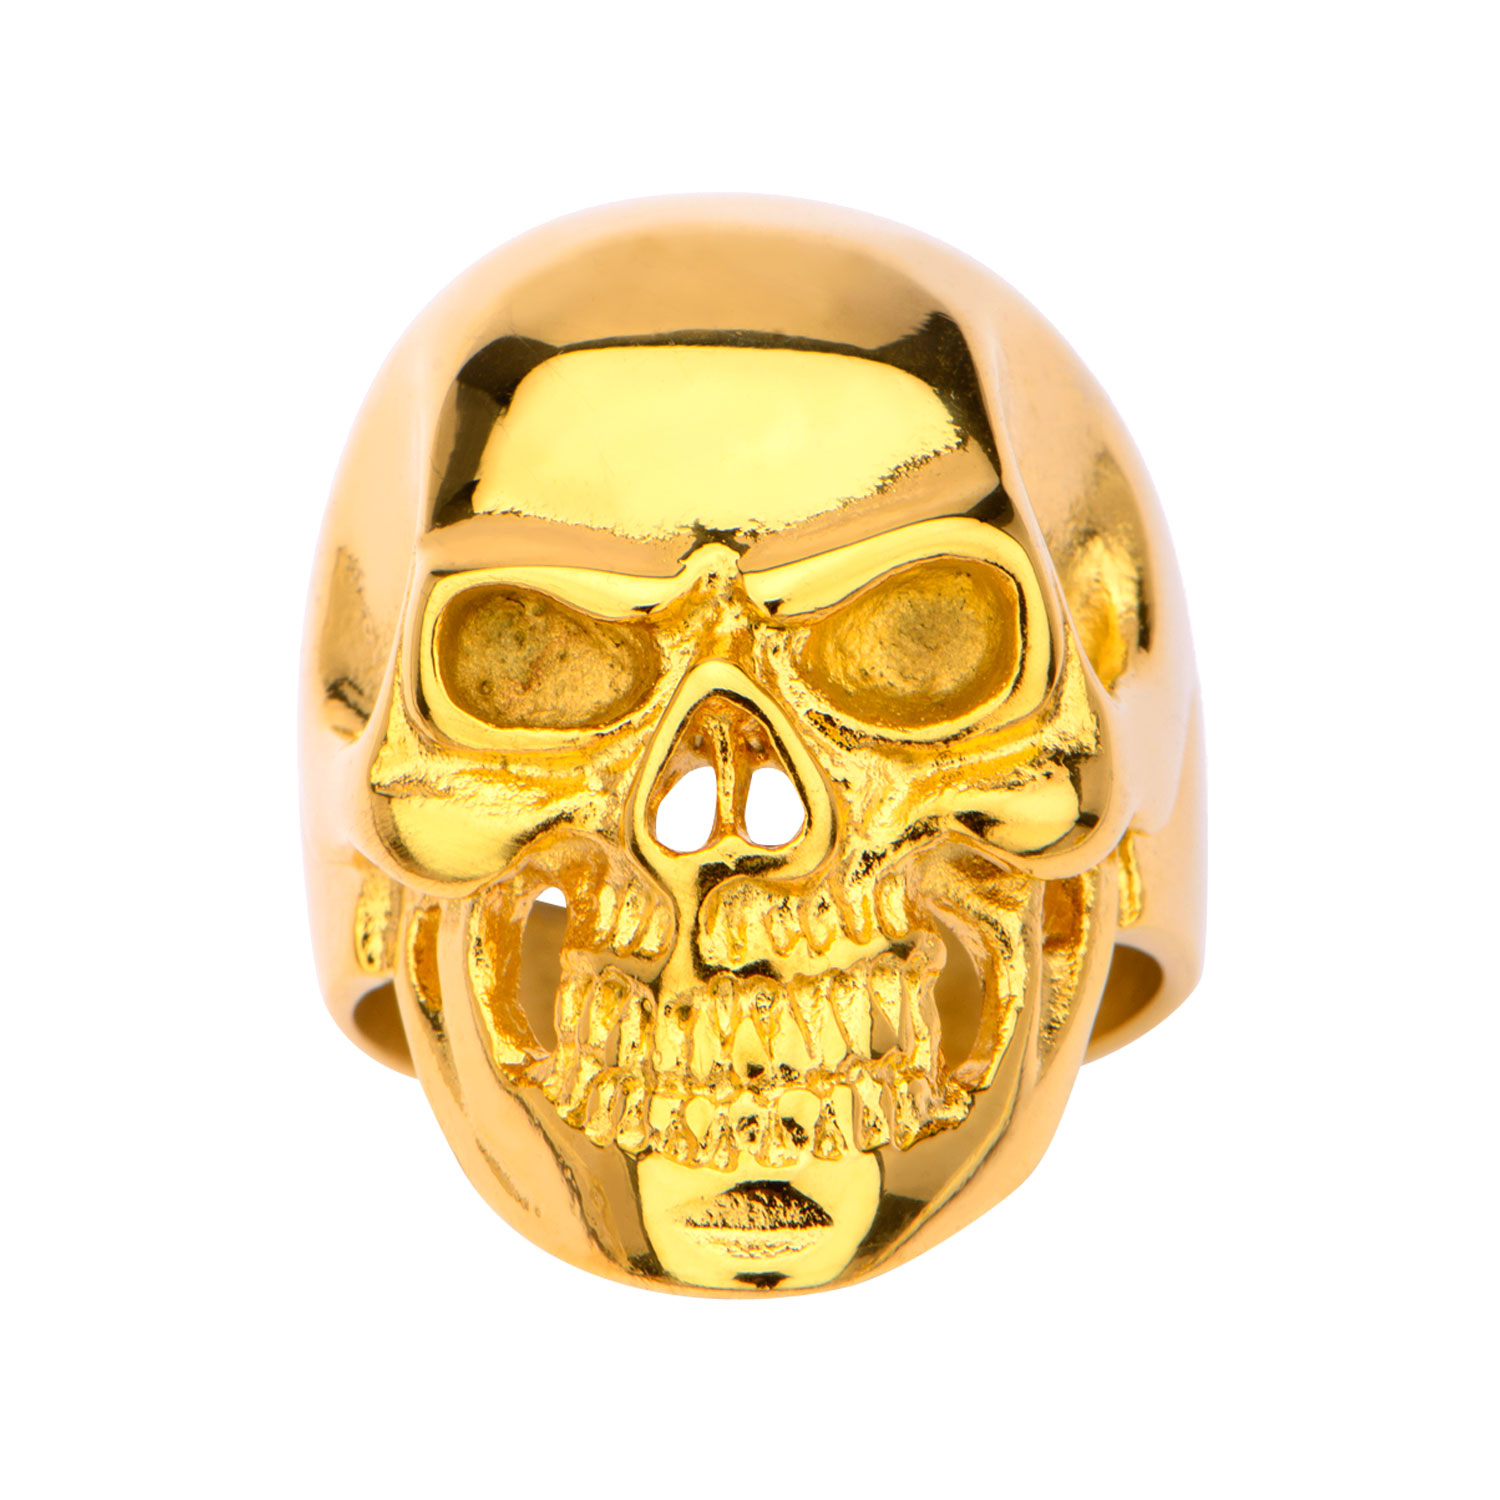 Gold Plated High Polished Front Face Skull Ring Image 2 Midtown Diamonds Reno, NV